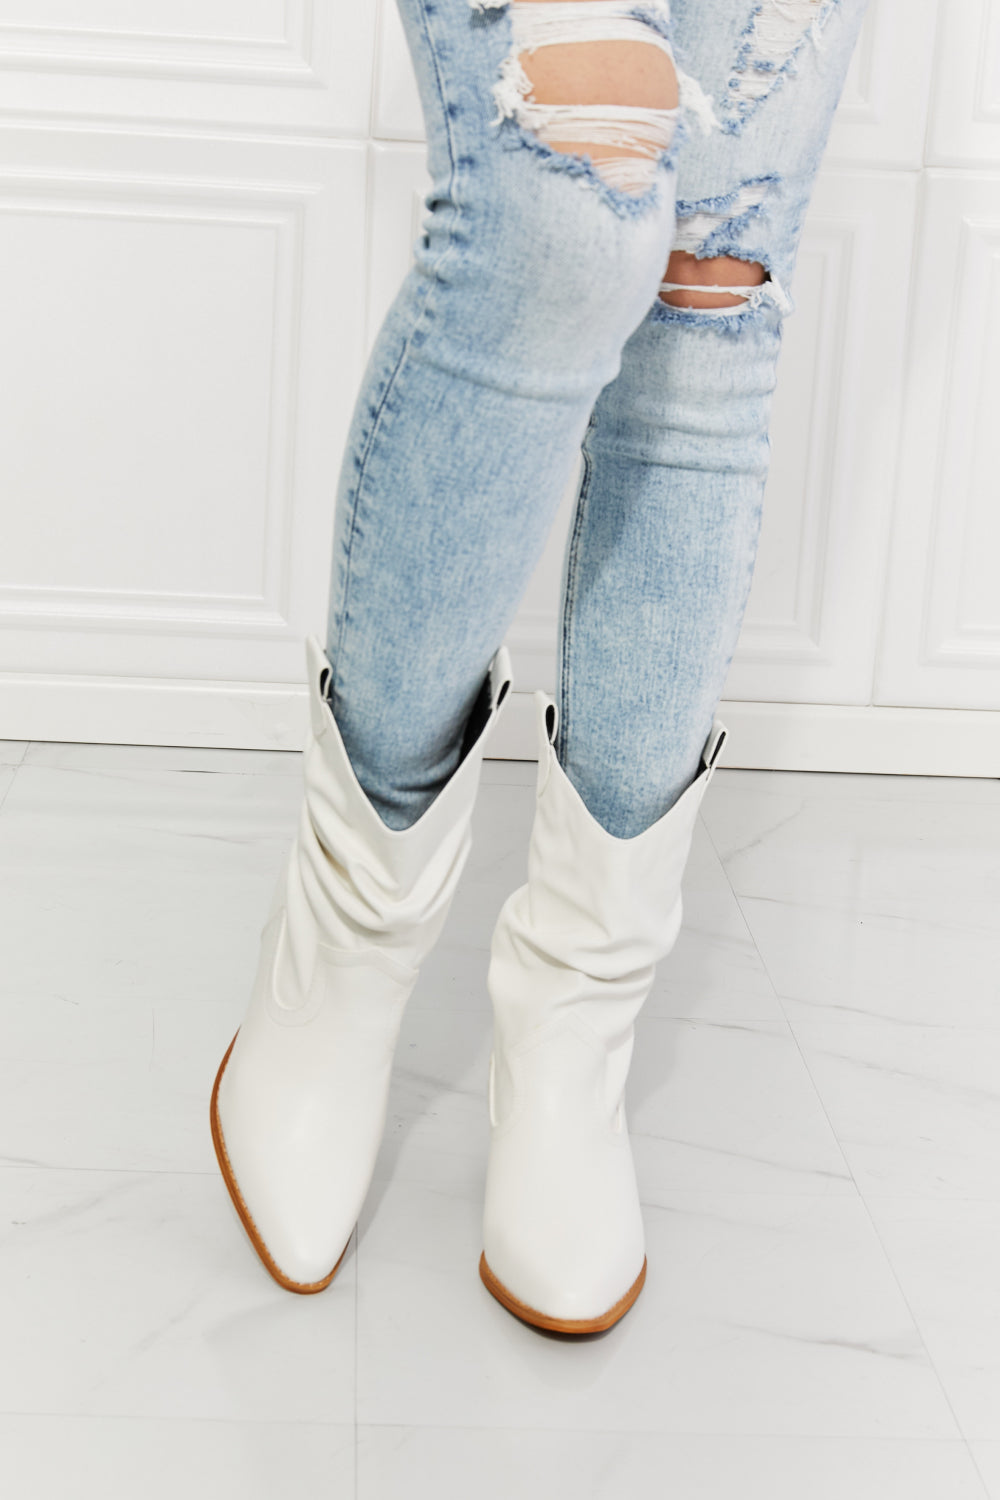 MMShoes Better in Texas Scrunch Cowboy Boots in White - The Beauty Alley Boutique Inc